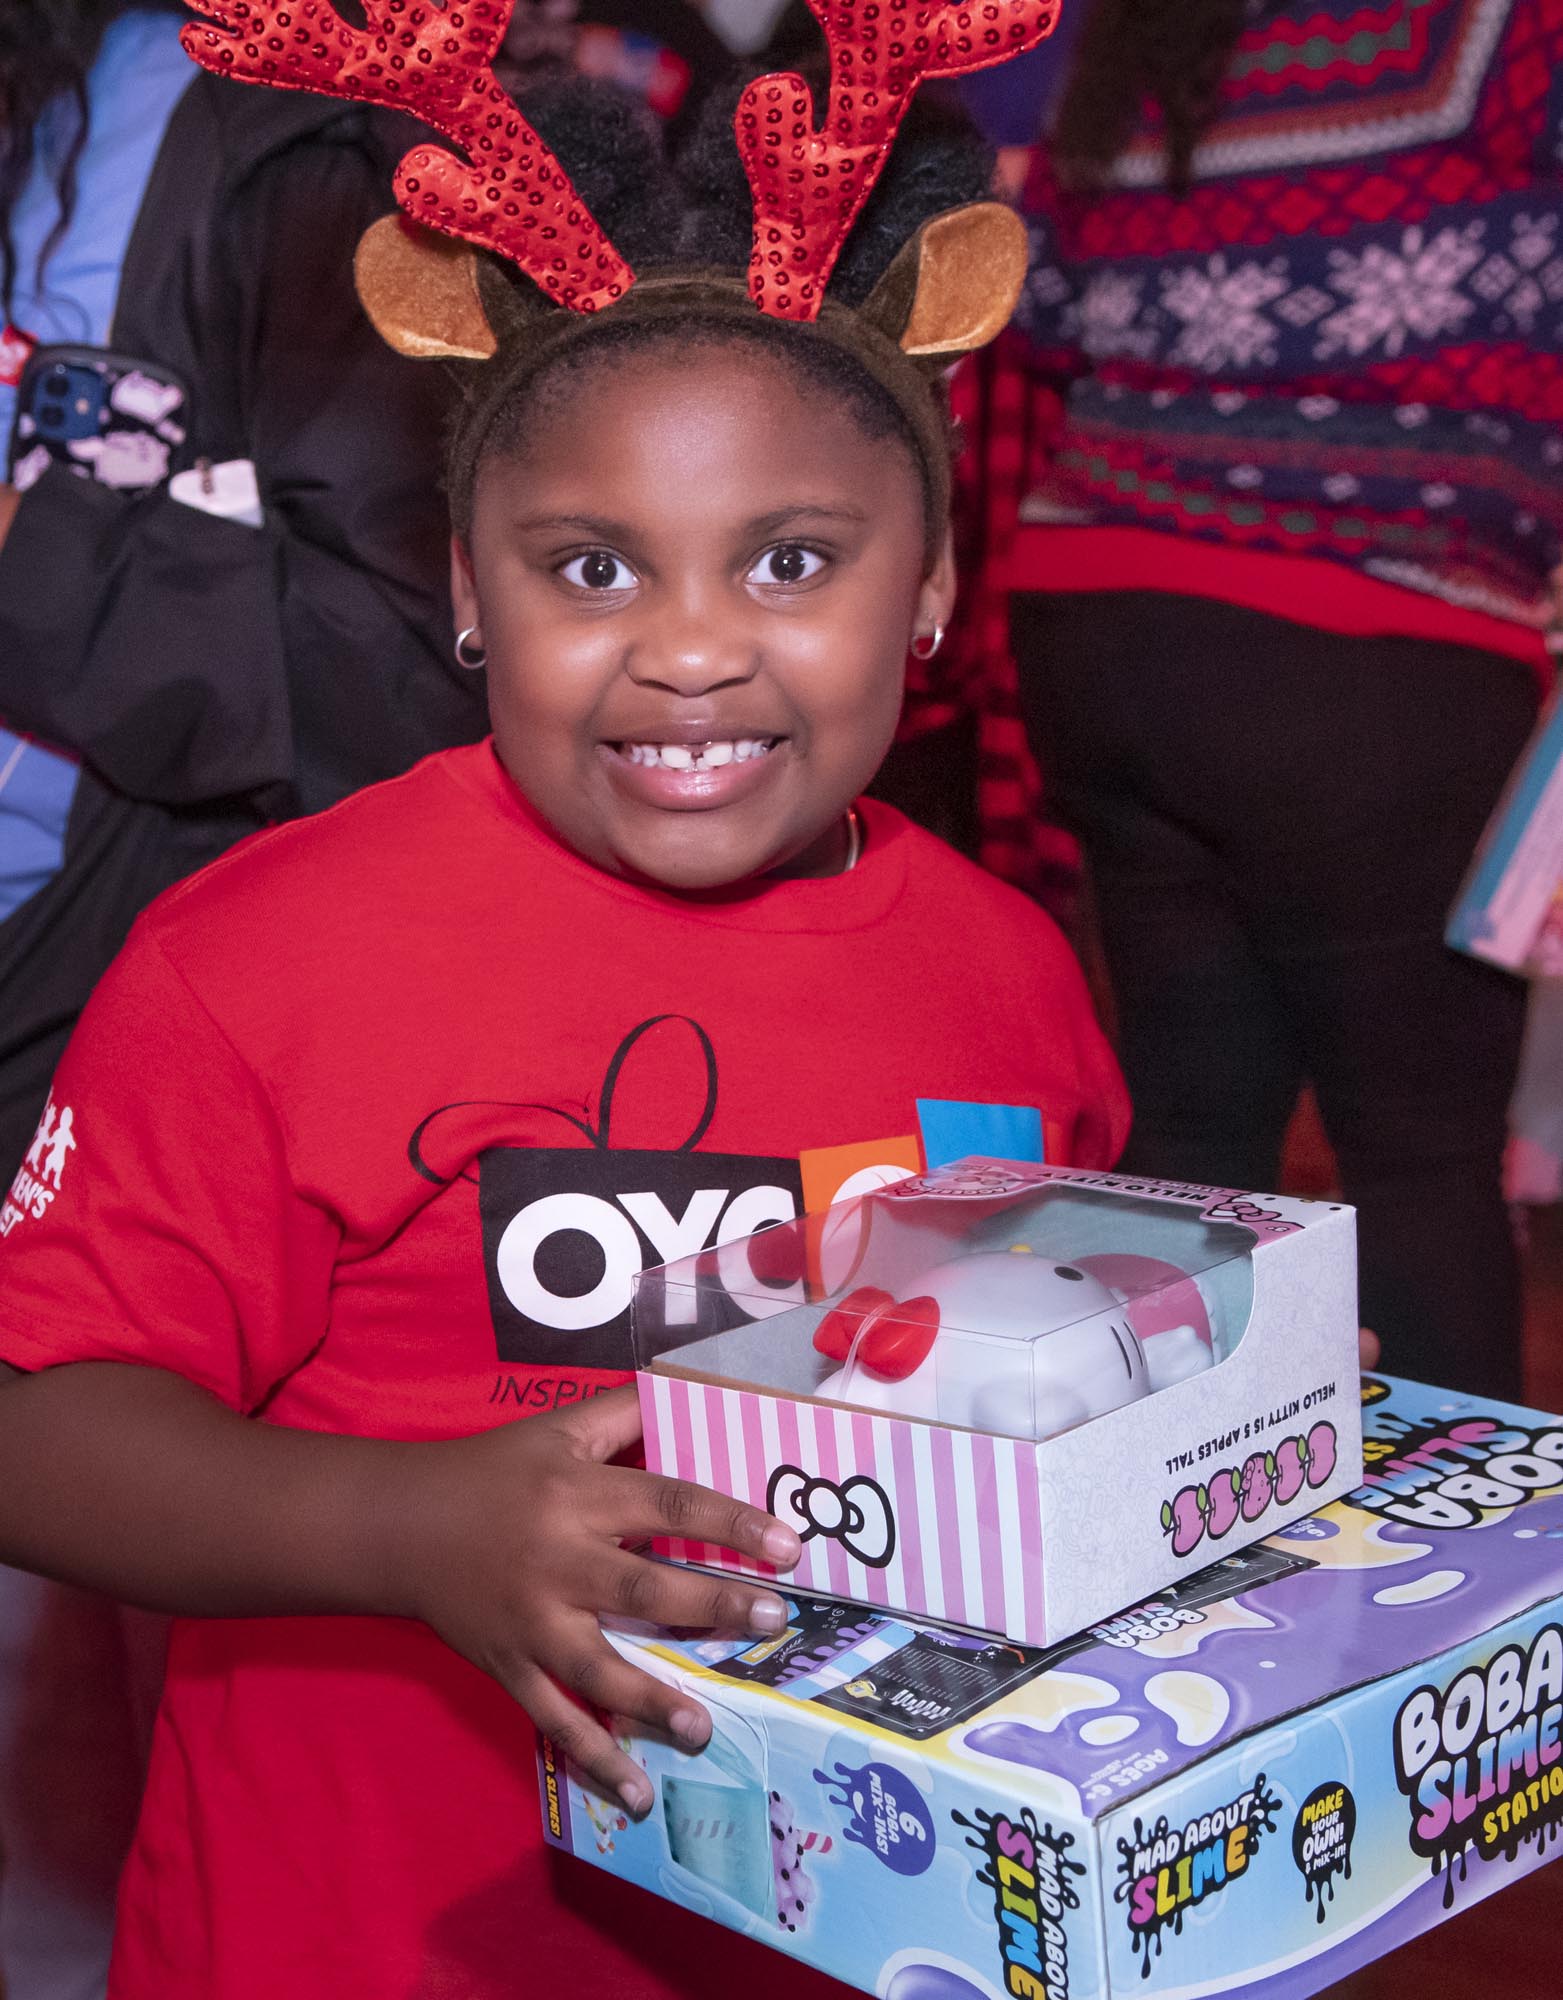 A child with her gifts poses for a photo at the Mourning Family Foundation holiday party.